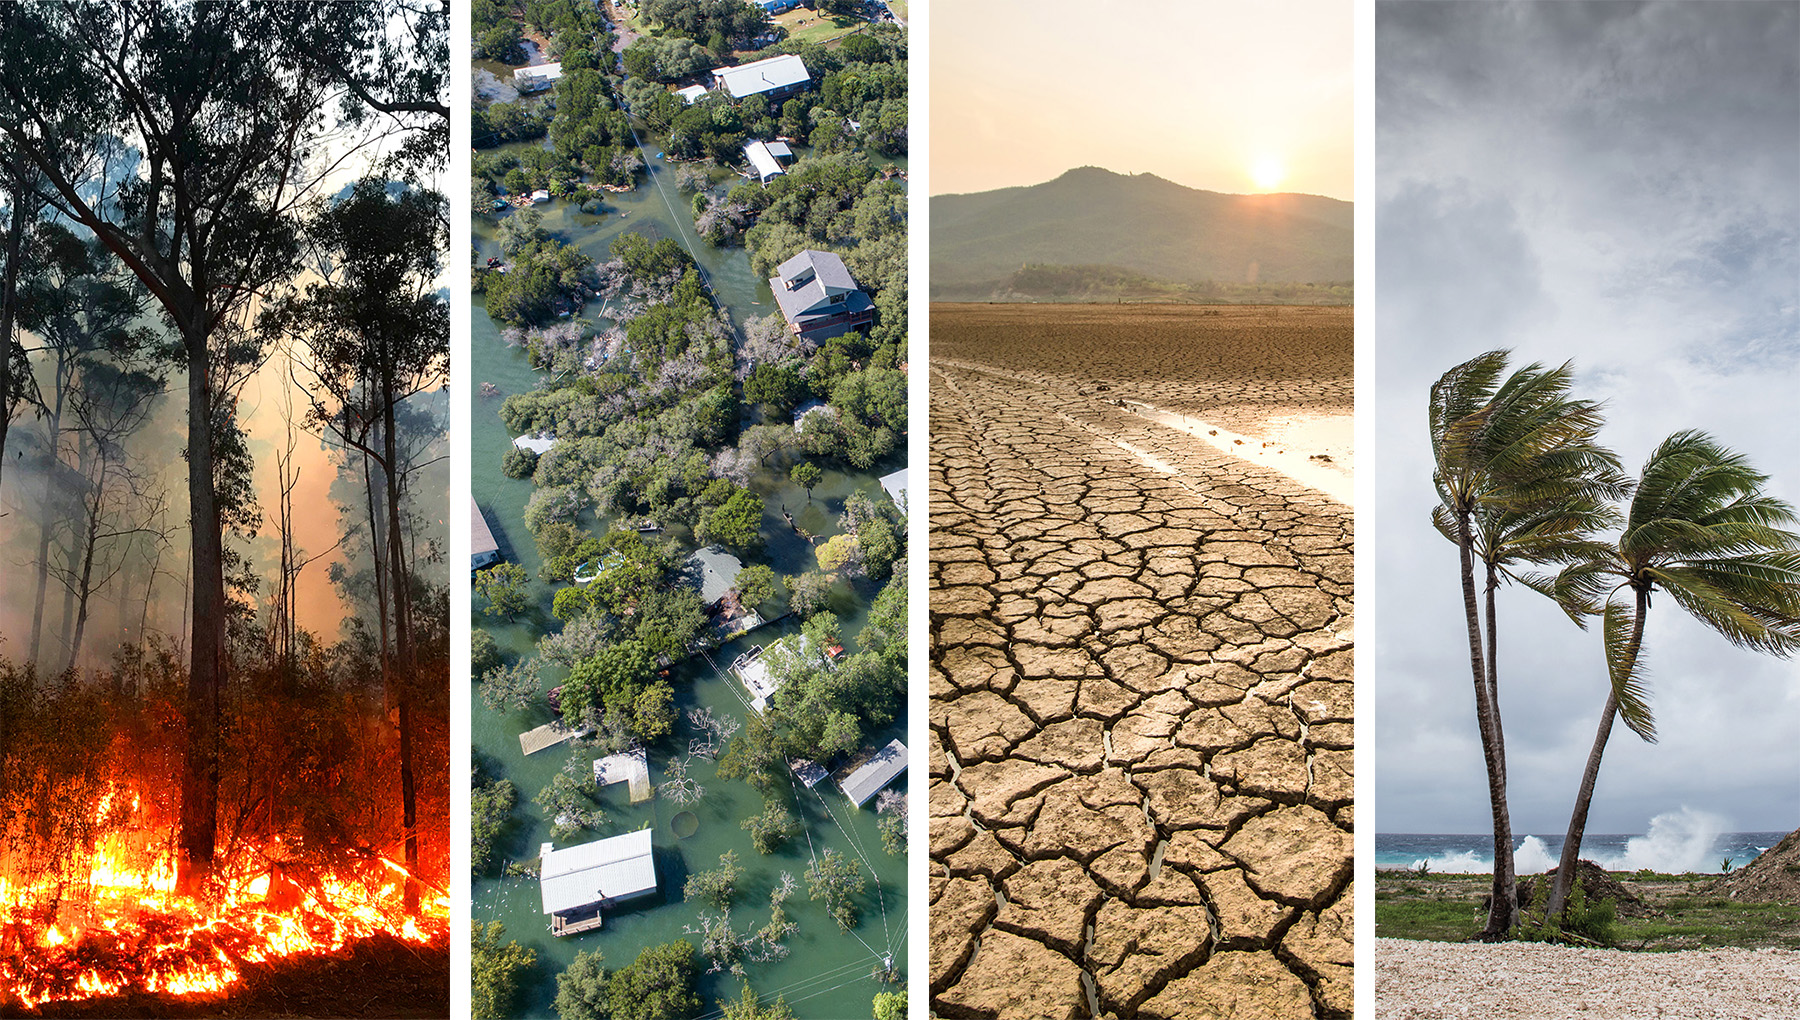 Extreme weather events for in the face of climate change